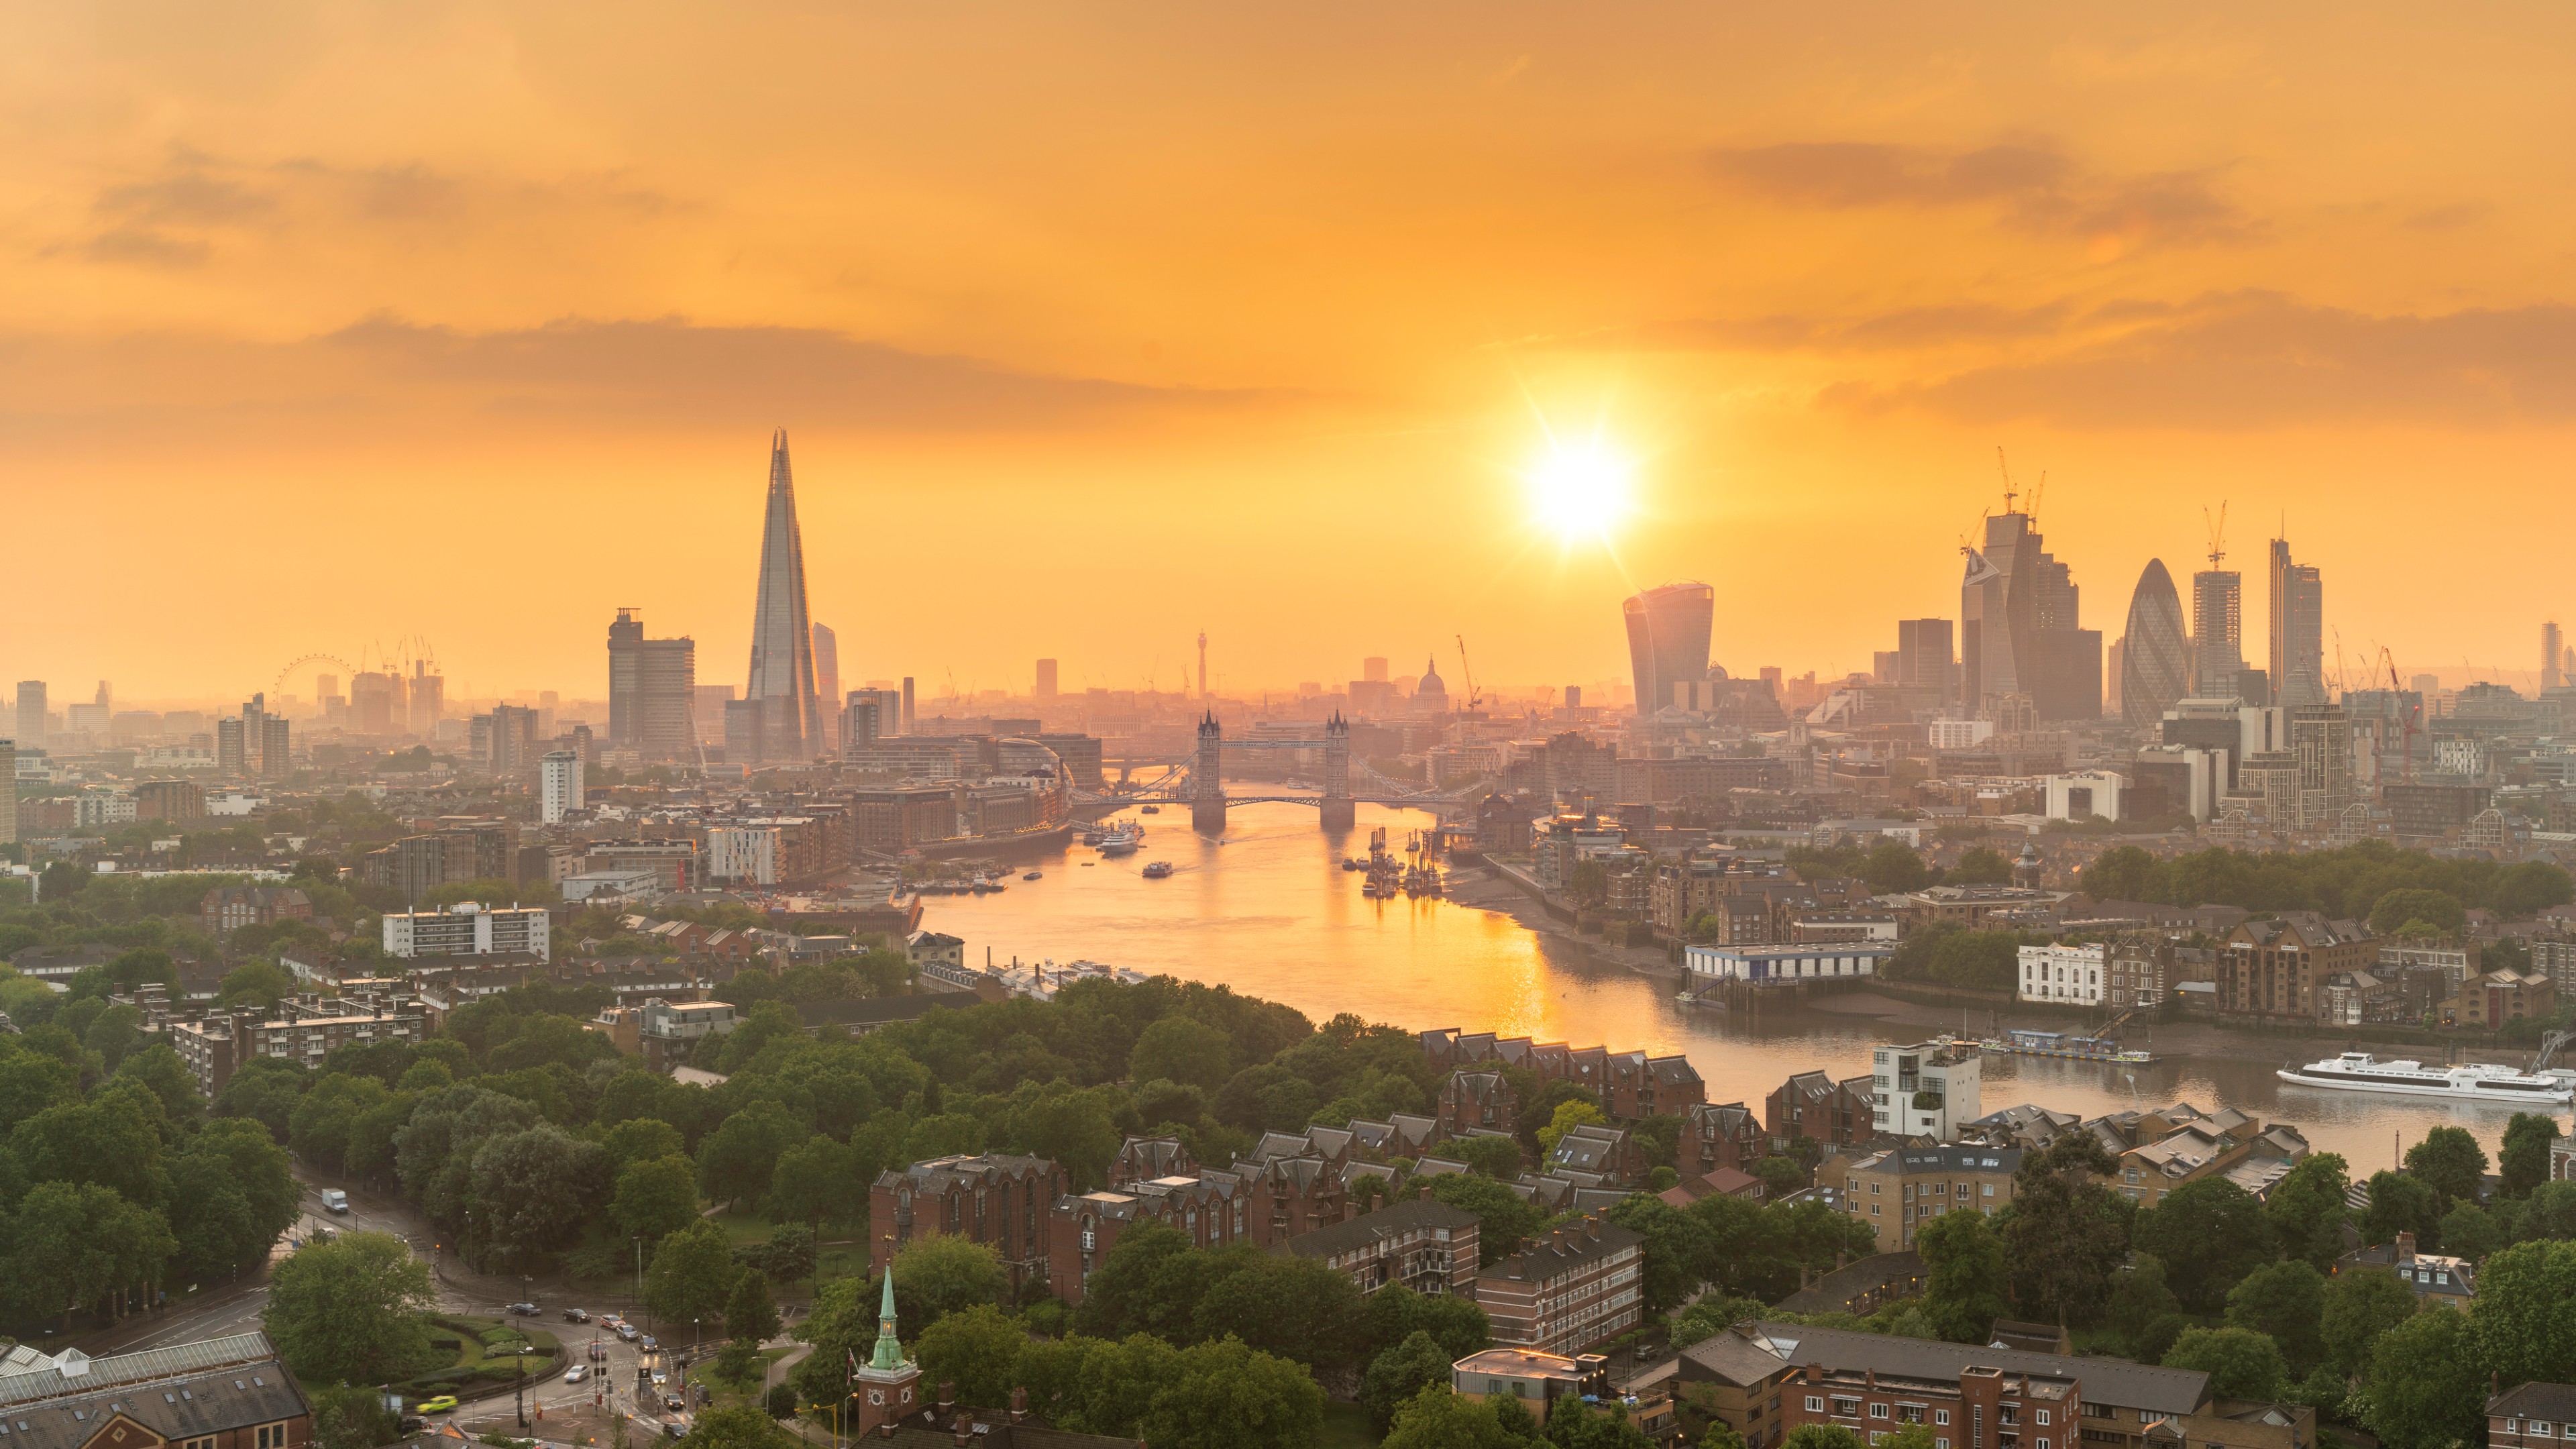 Sunset over London showing the River Thames and the city skyline